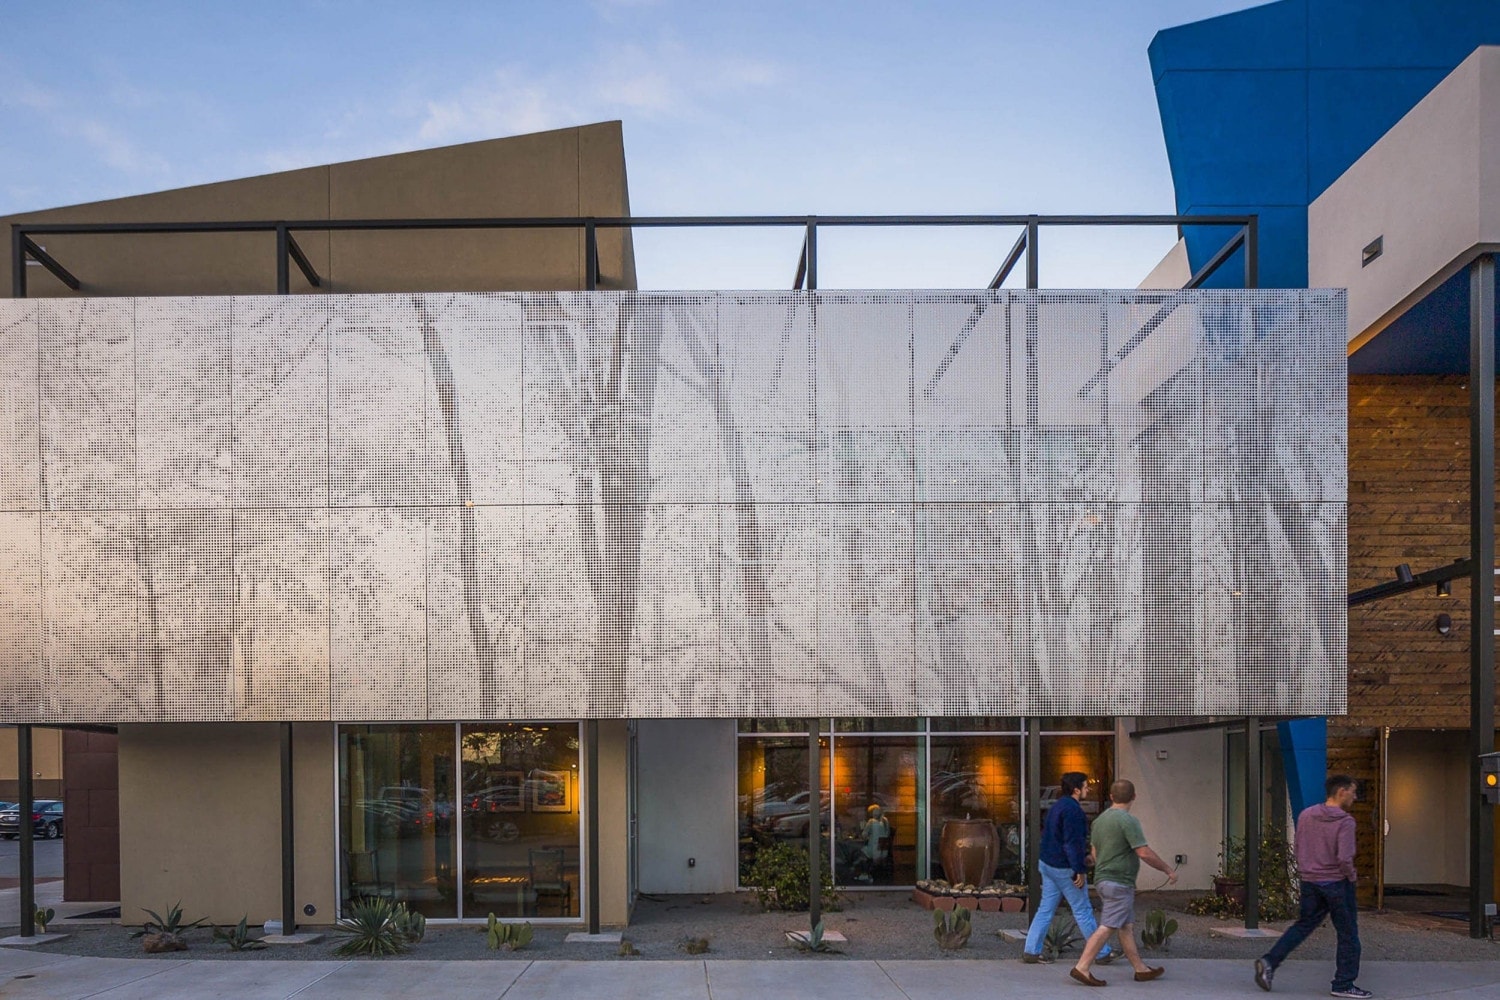 Restaurant facade and ImageWall screen in angel hair stainless steel with imagery of tree branches.